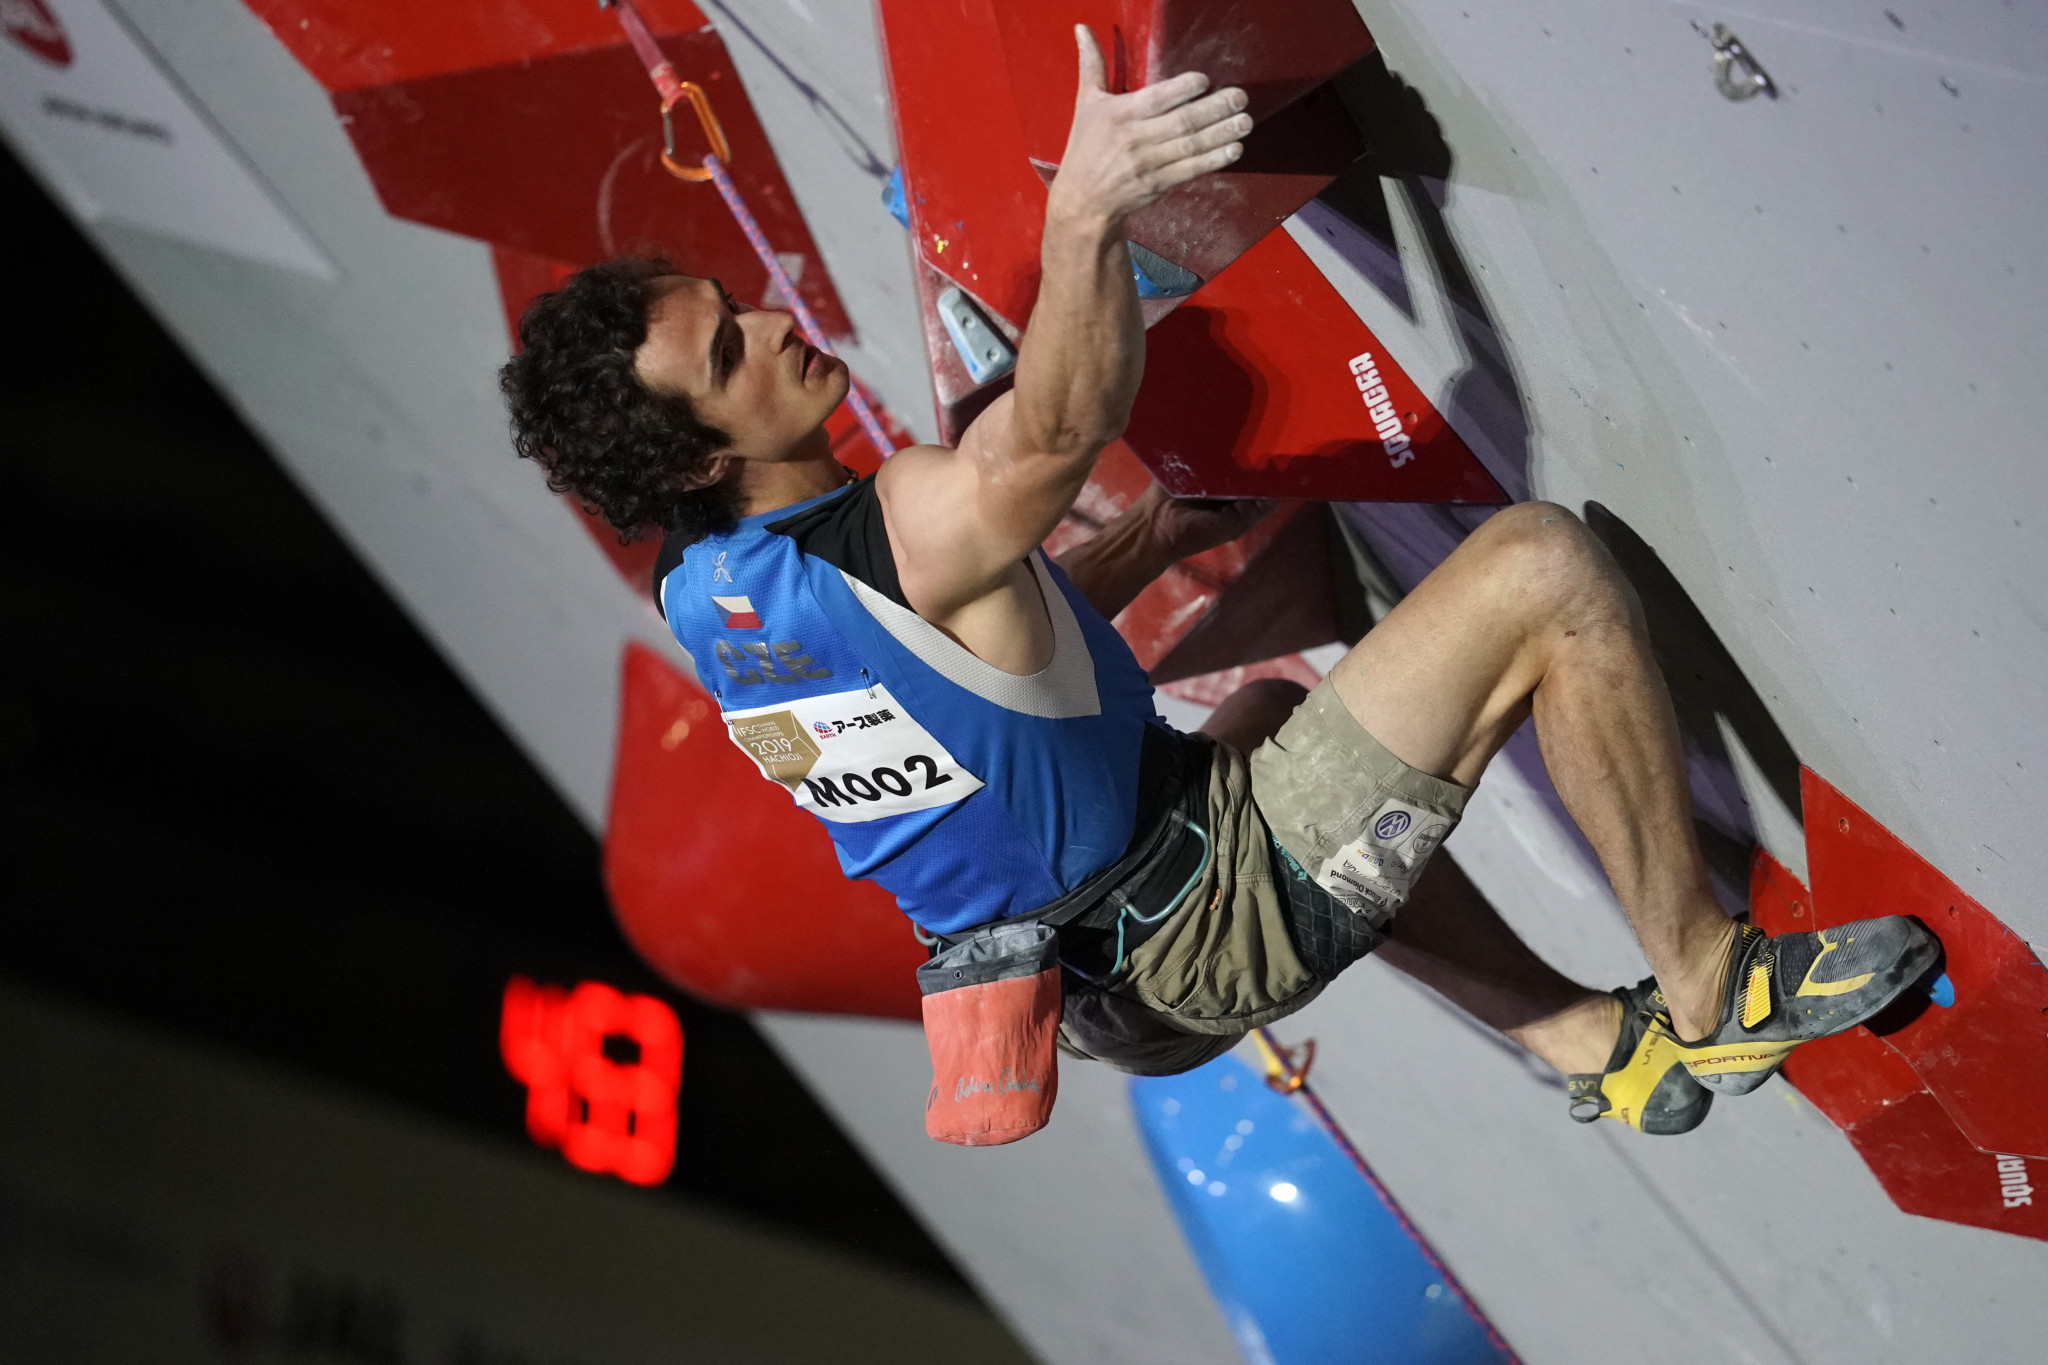 Newly-crowned men's lead world champion, Czech Republic's Adam Ondra, is due to be back in action in Kranj ©Getty Images